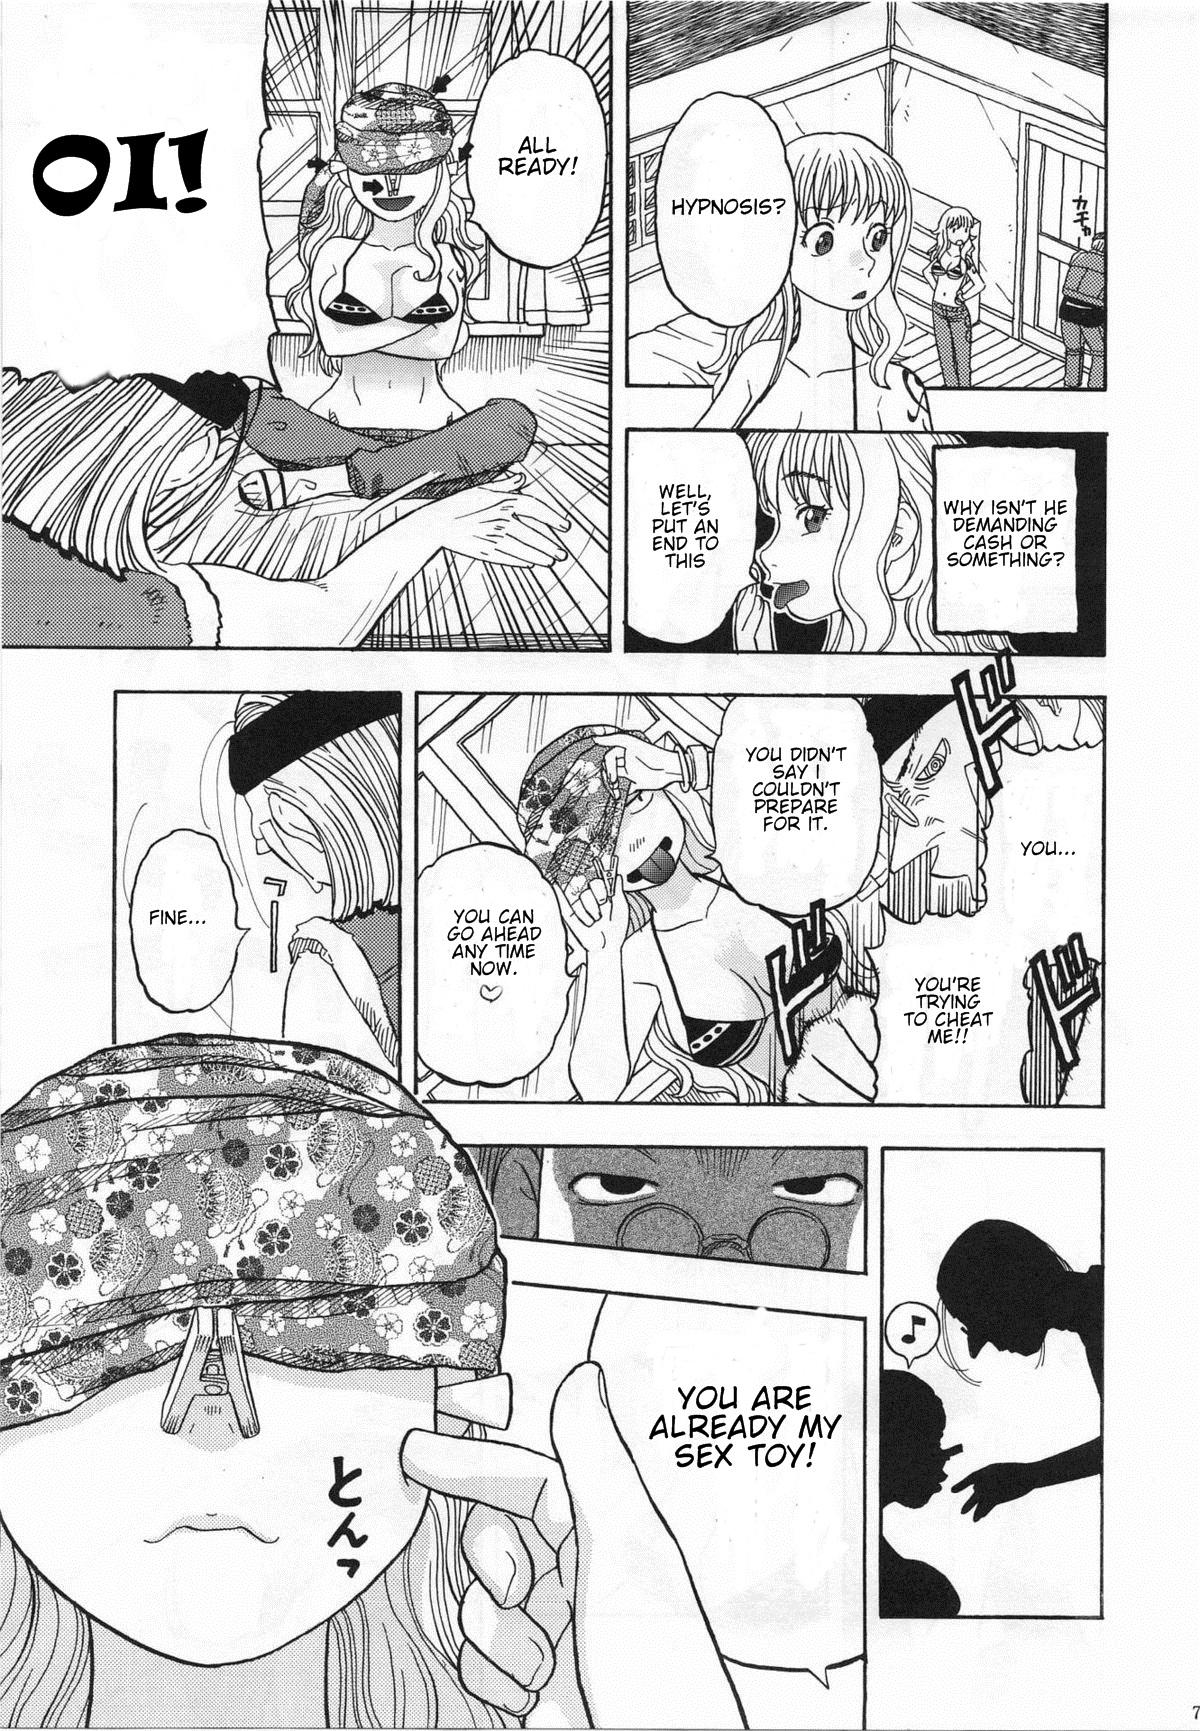 Teasing Nami no Iinari Saimin | Nami's Submission Hypnosis - One piece Little - Page 4